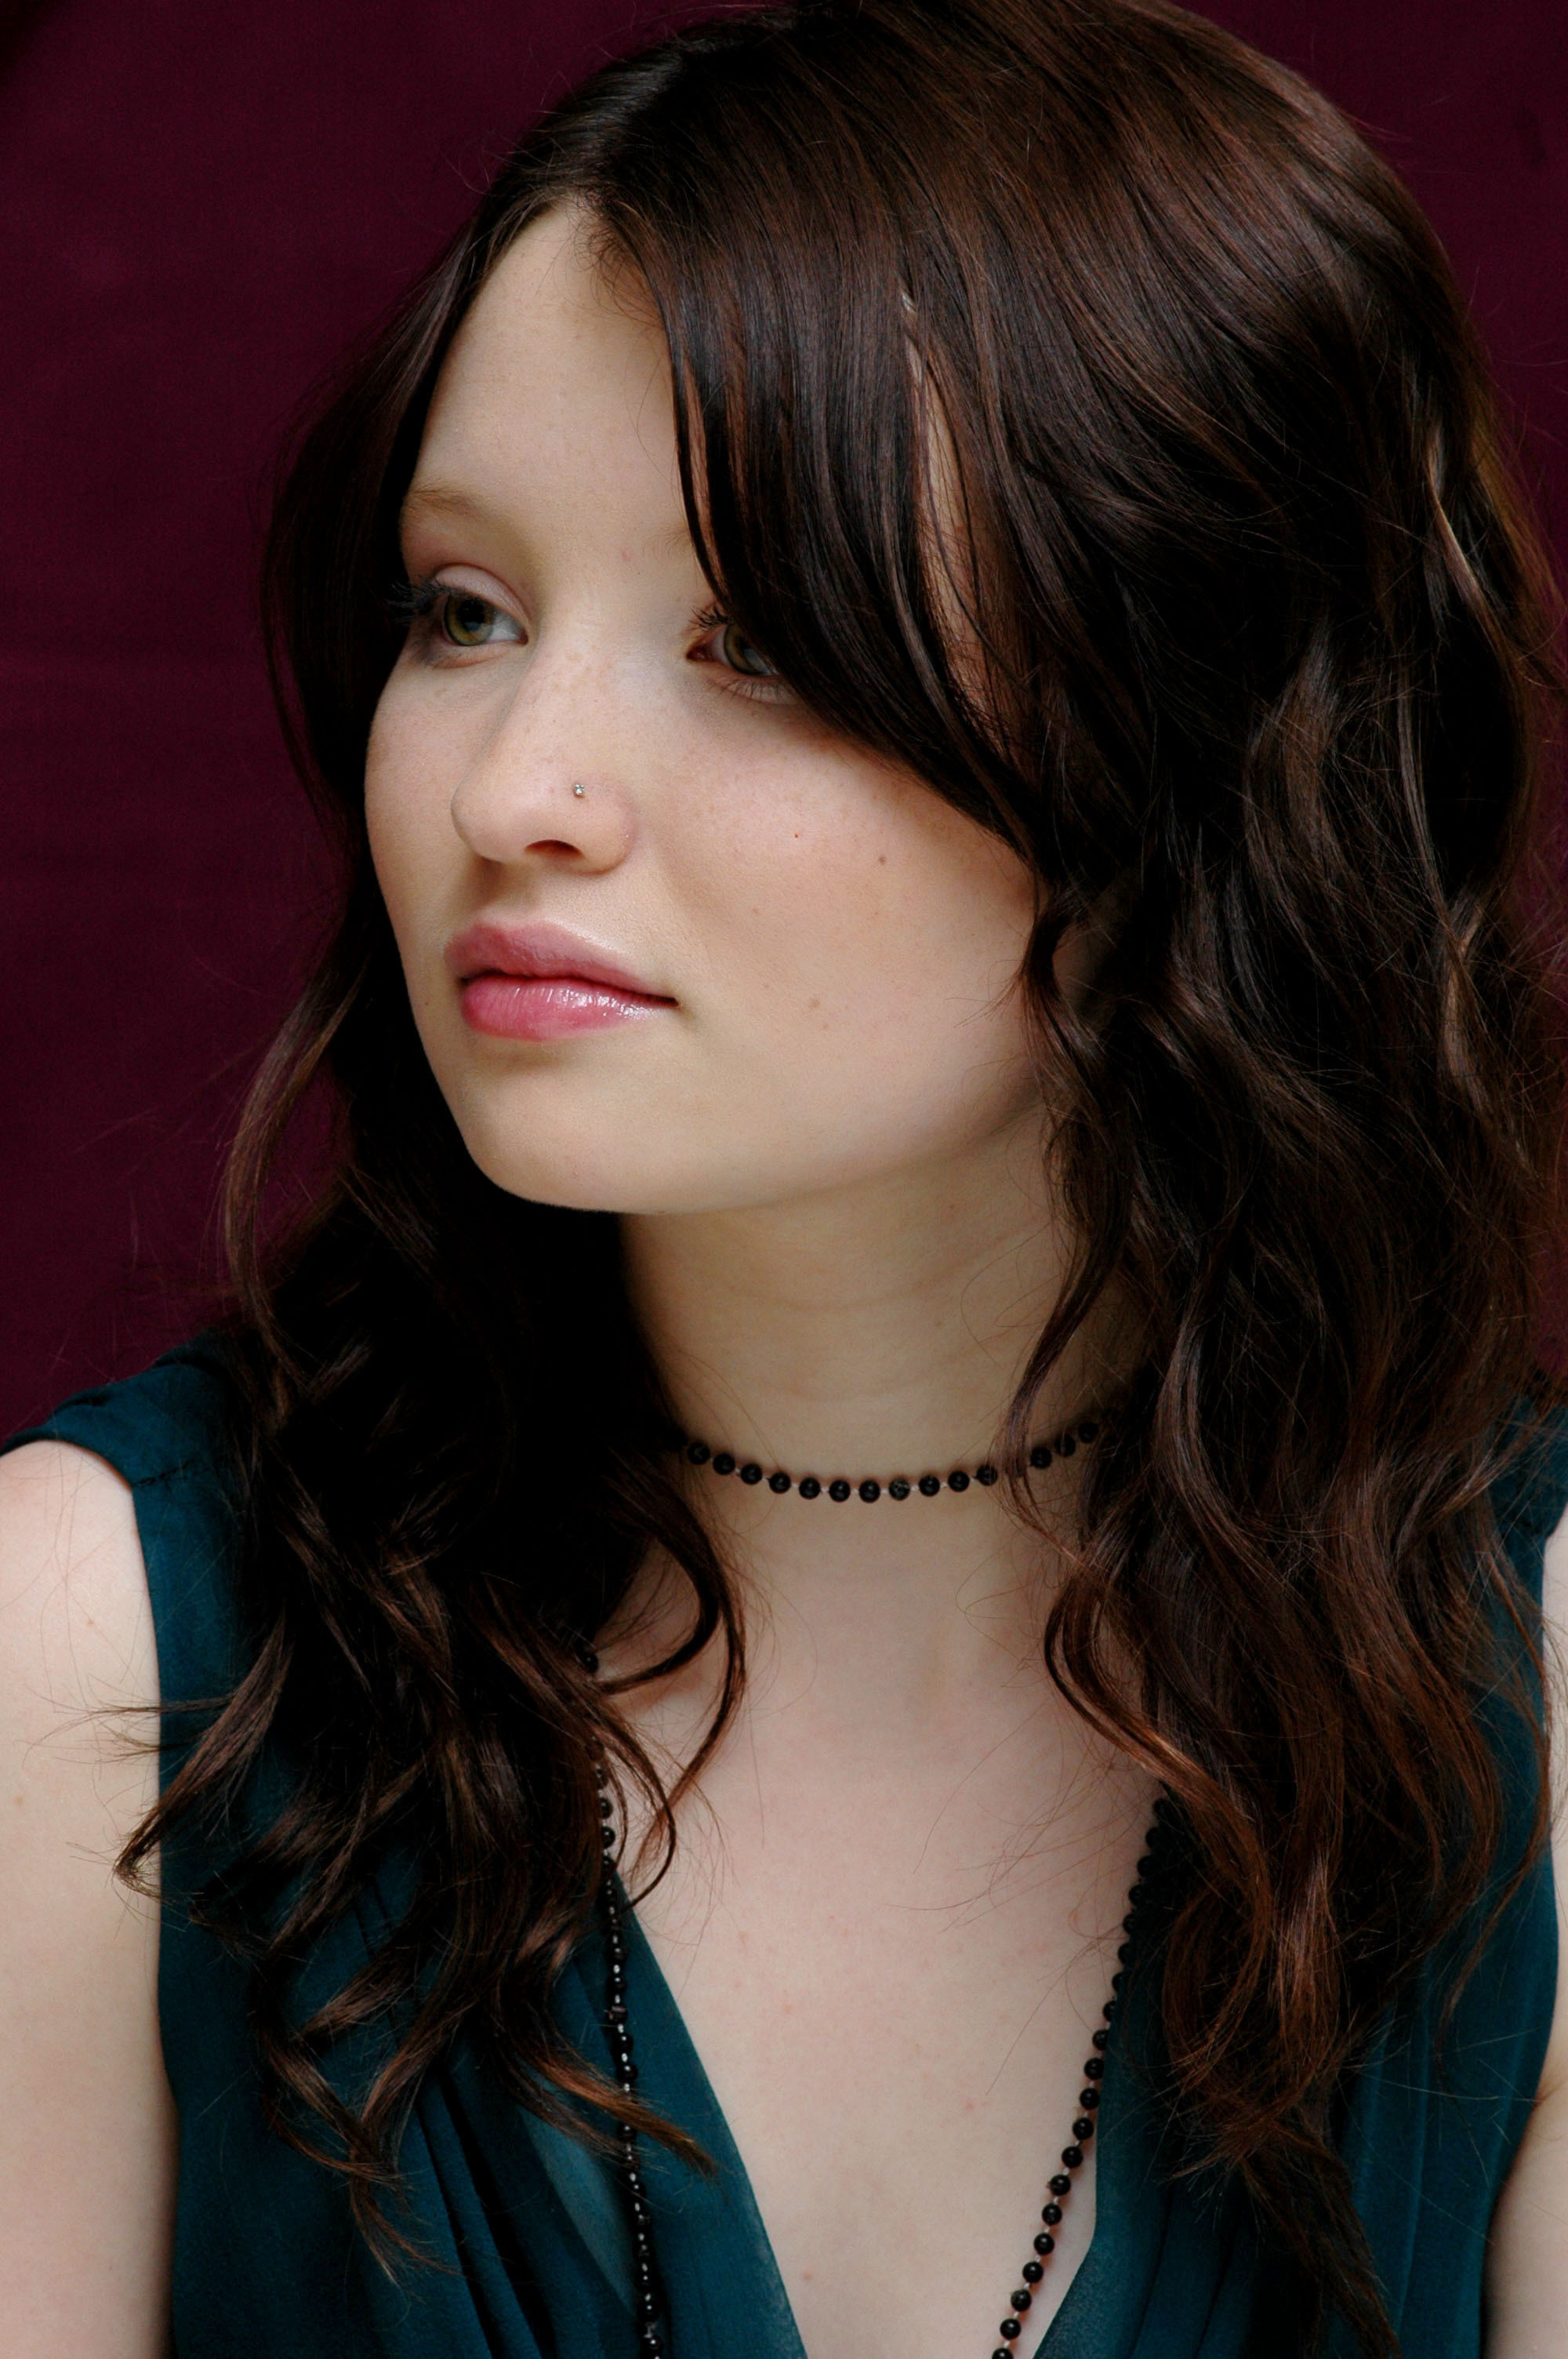 Emily Browning wallpapers, Mobile-friendly designs, Custom backgrounds, Vibrant visuals, 2000x3010 HD Phone